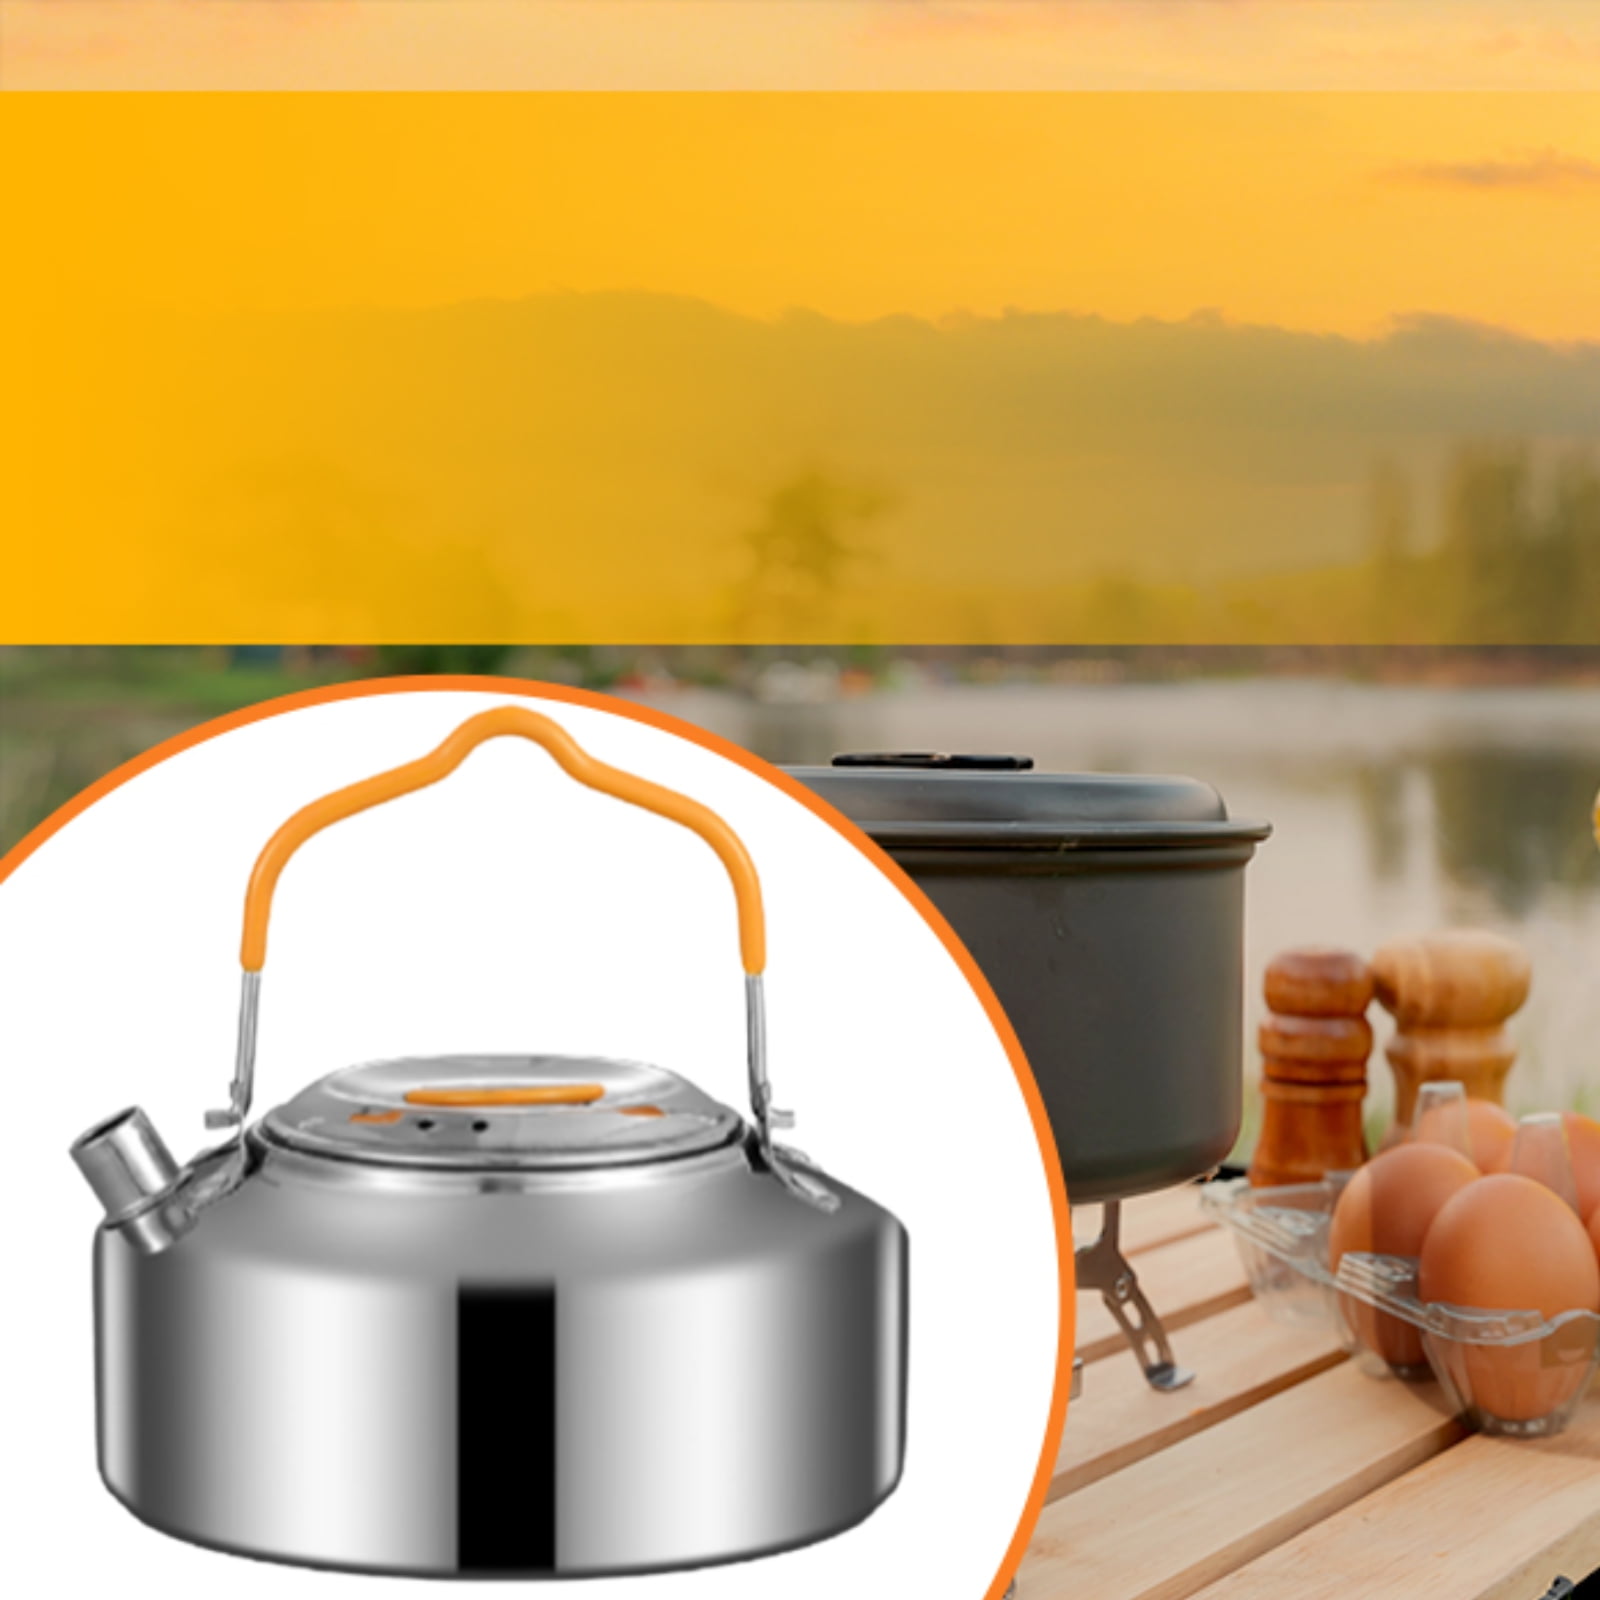 Portable Camping Kettle Tea Pot Water Kettle Coffee Pot Cookware Campfire Kettle, Size: 17.5cmx7.5cm, Other